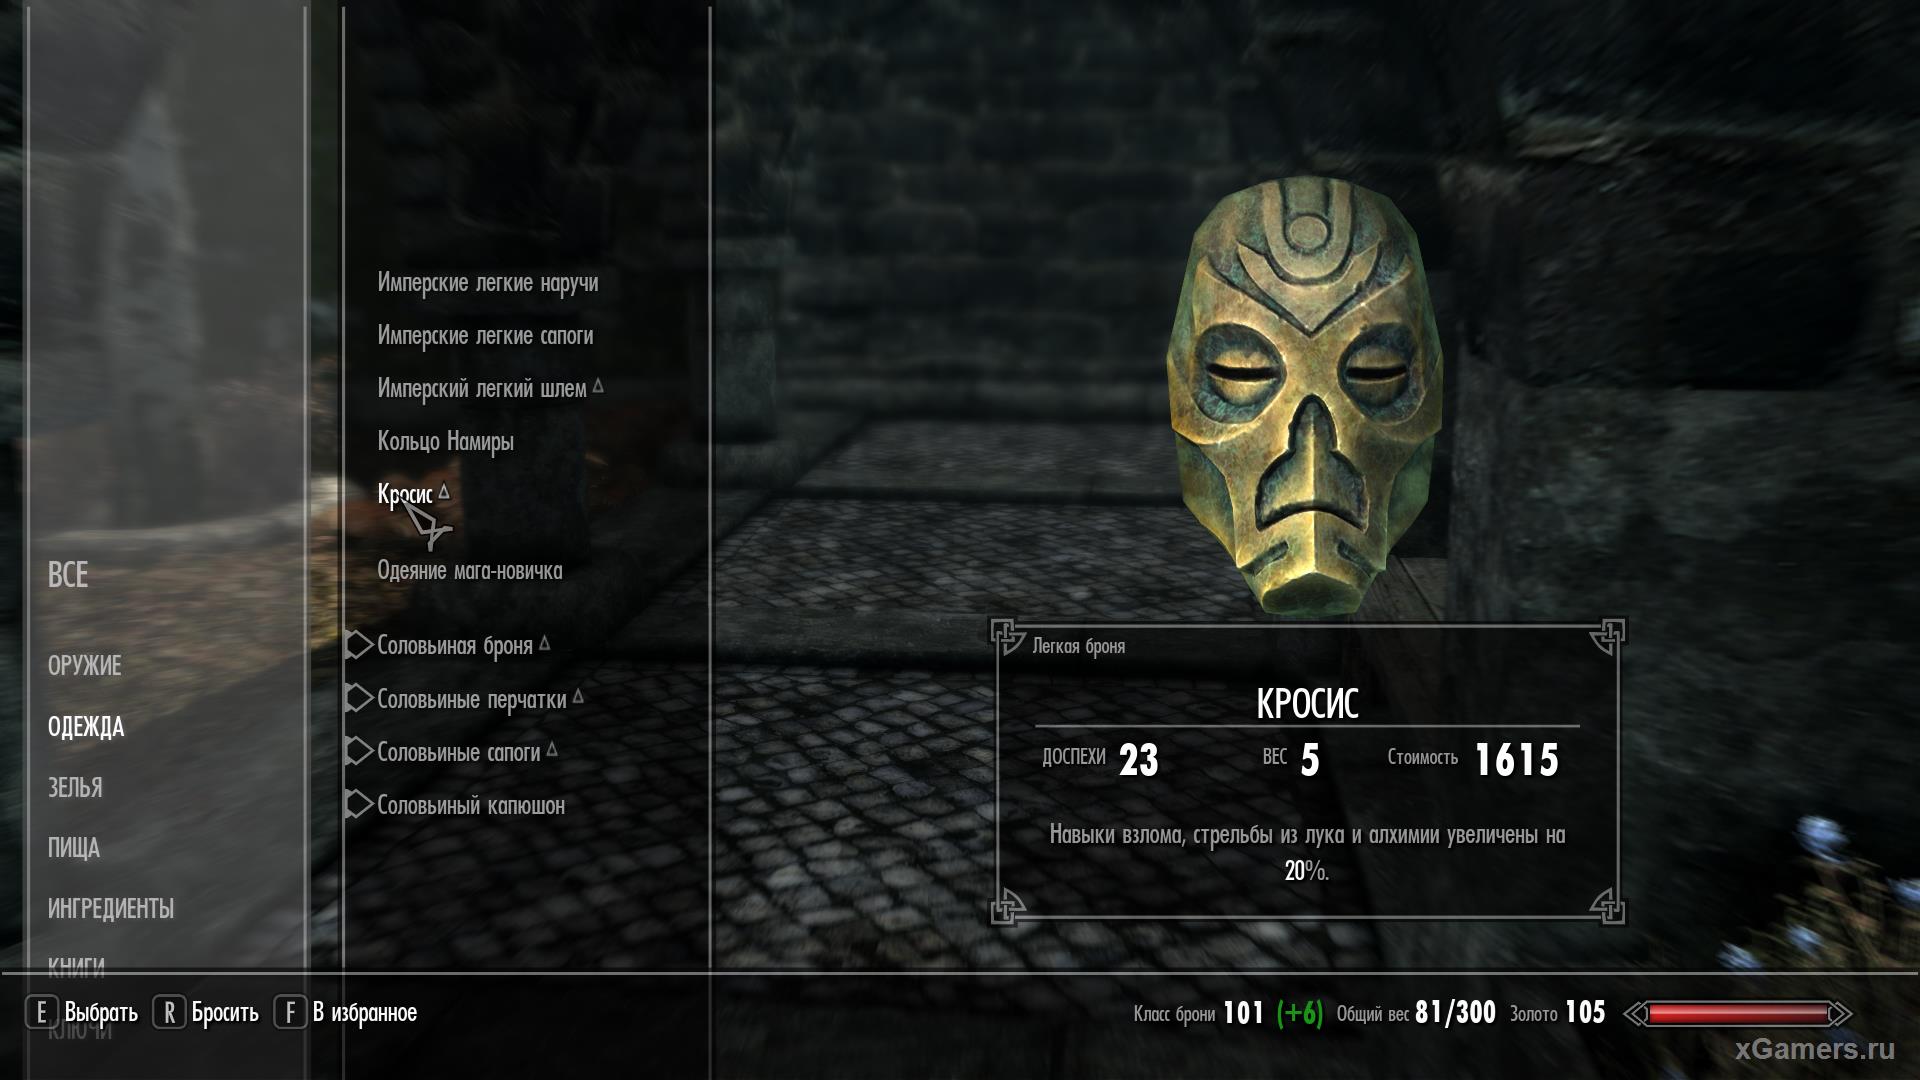 How to find the item ID in Skyrim